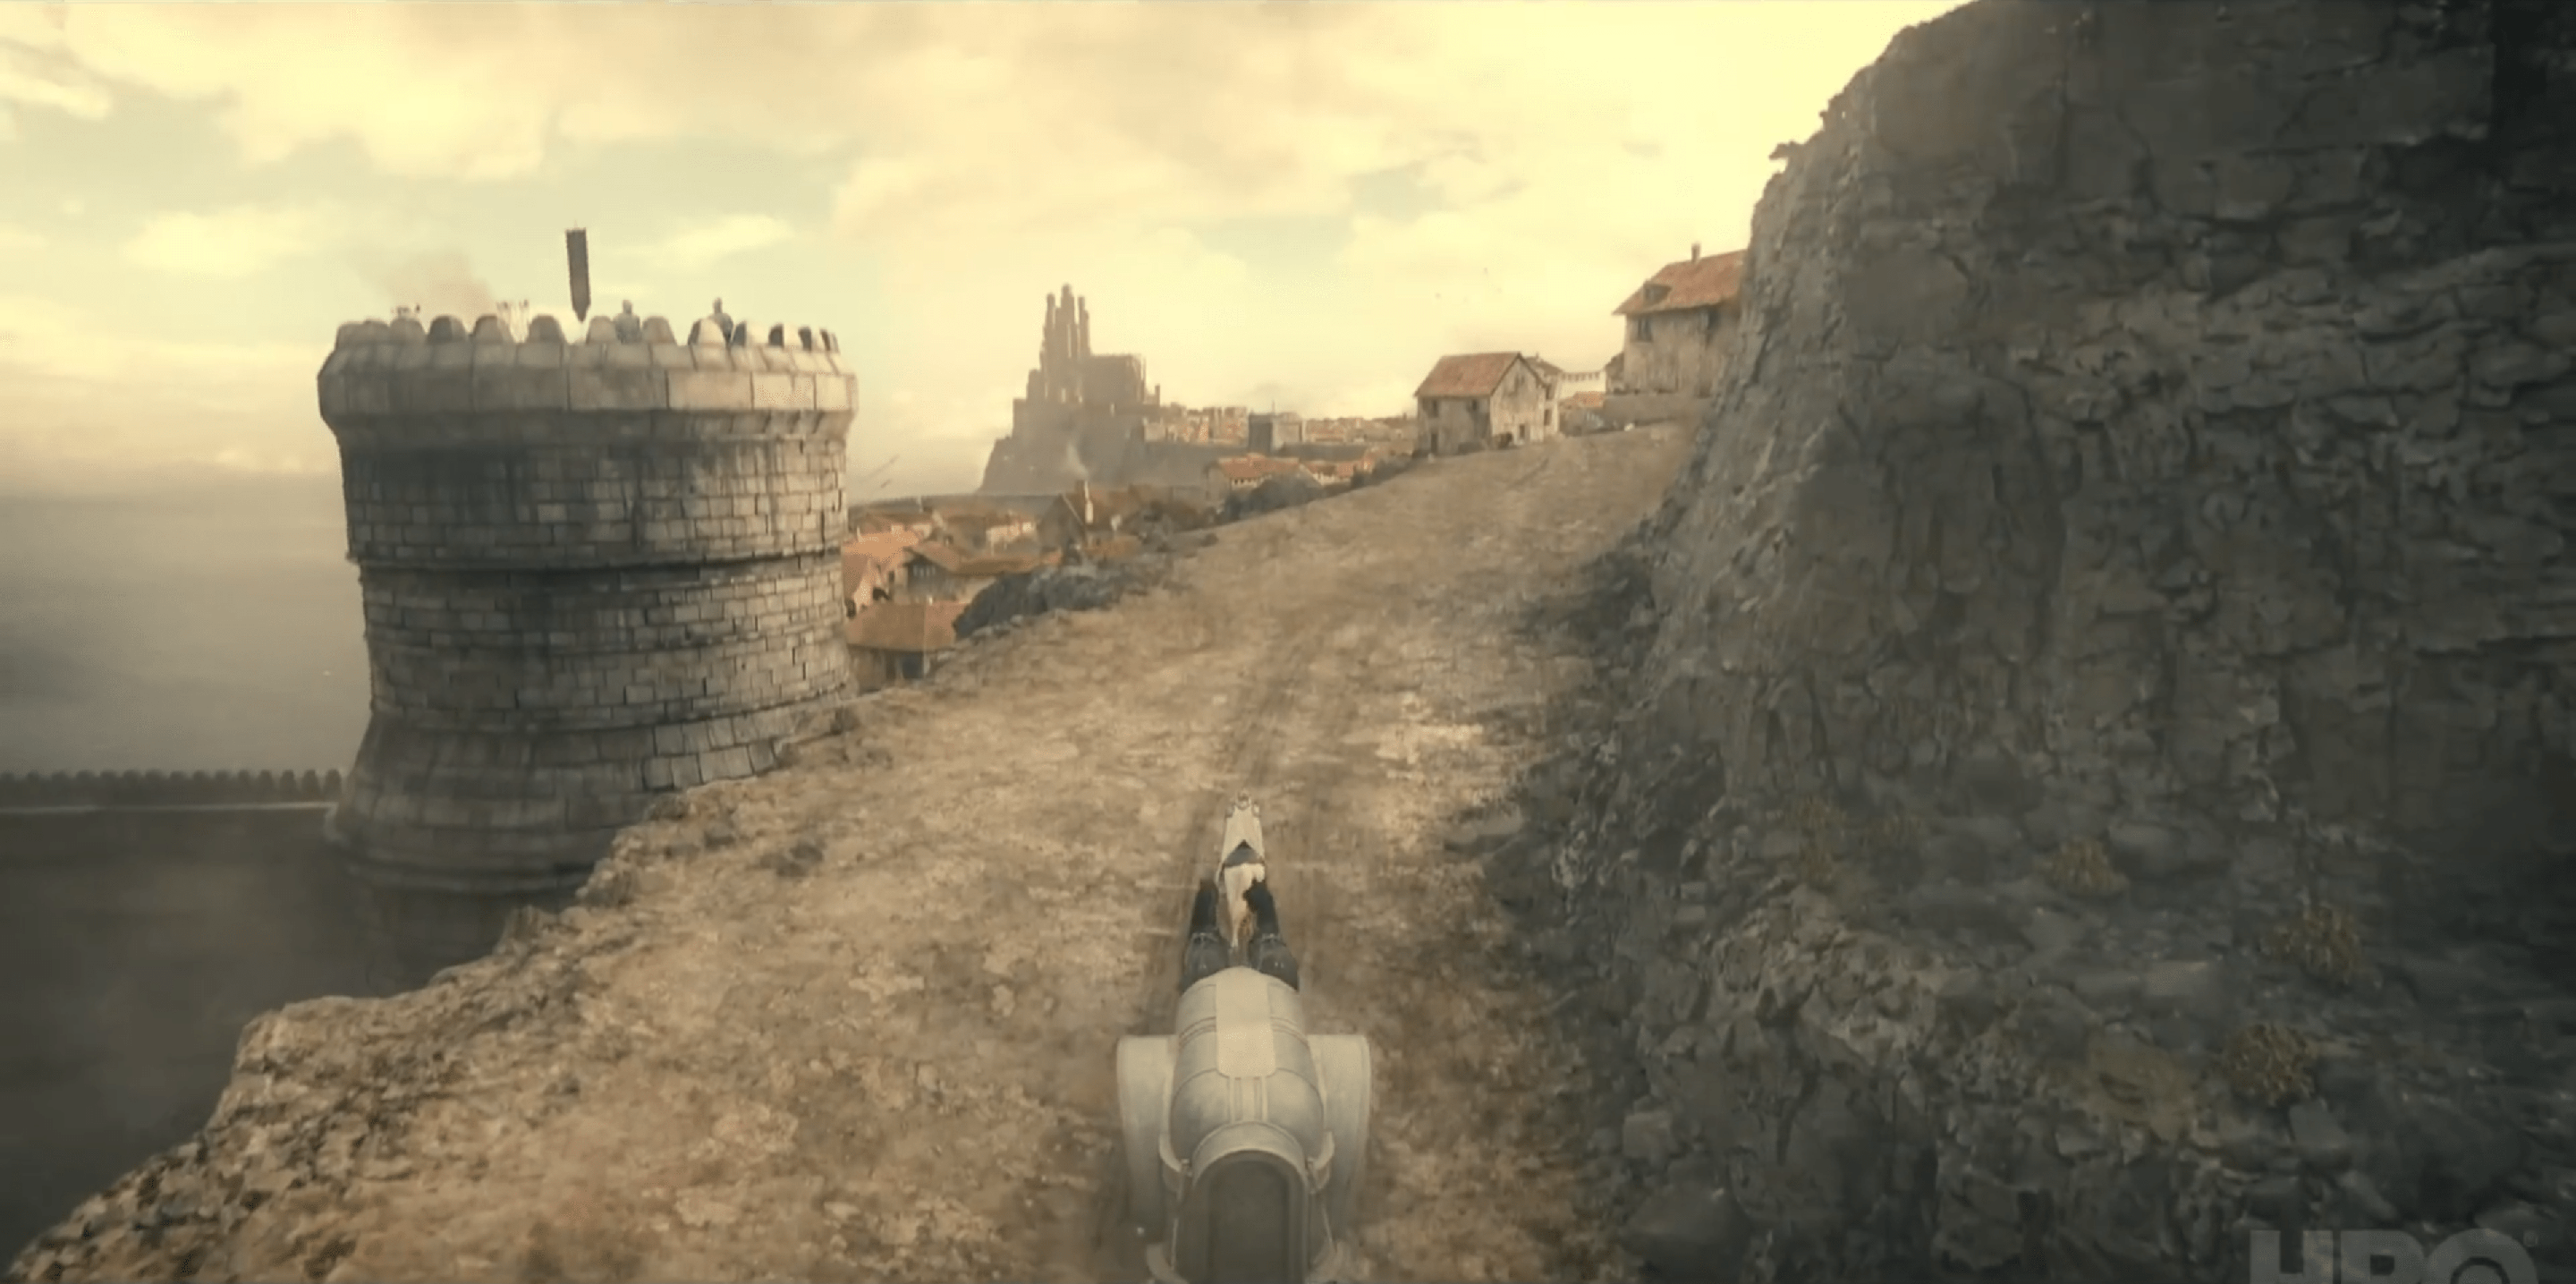 Alicent's litter, guarded by a kingsguard, approaches King's Landing